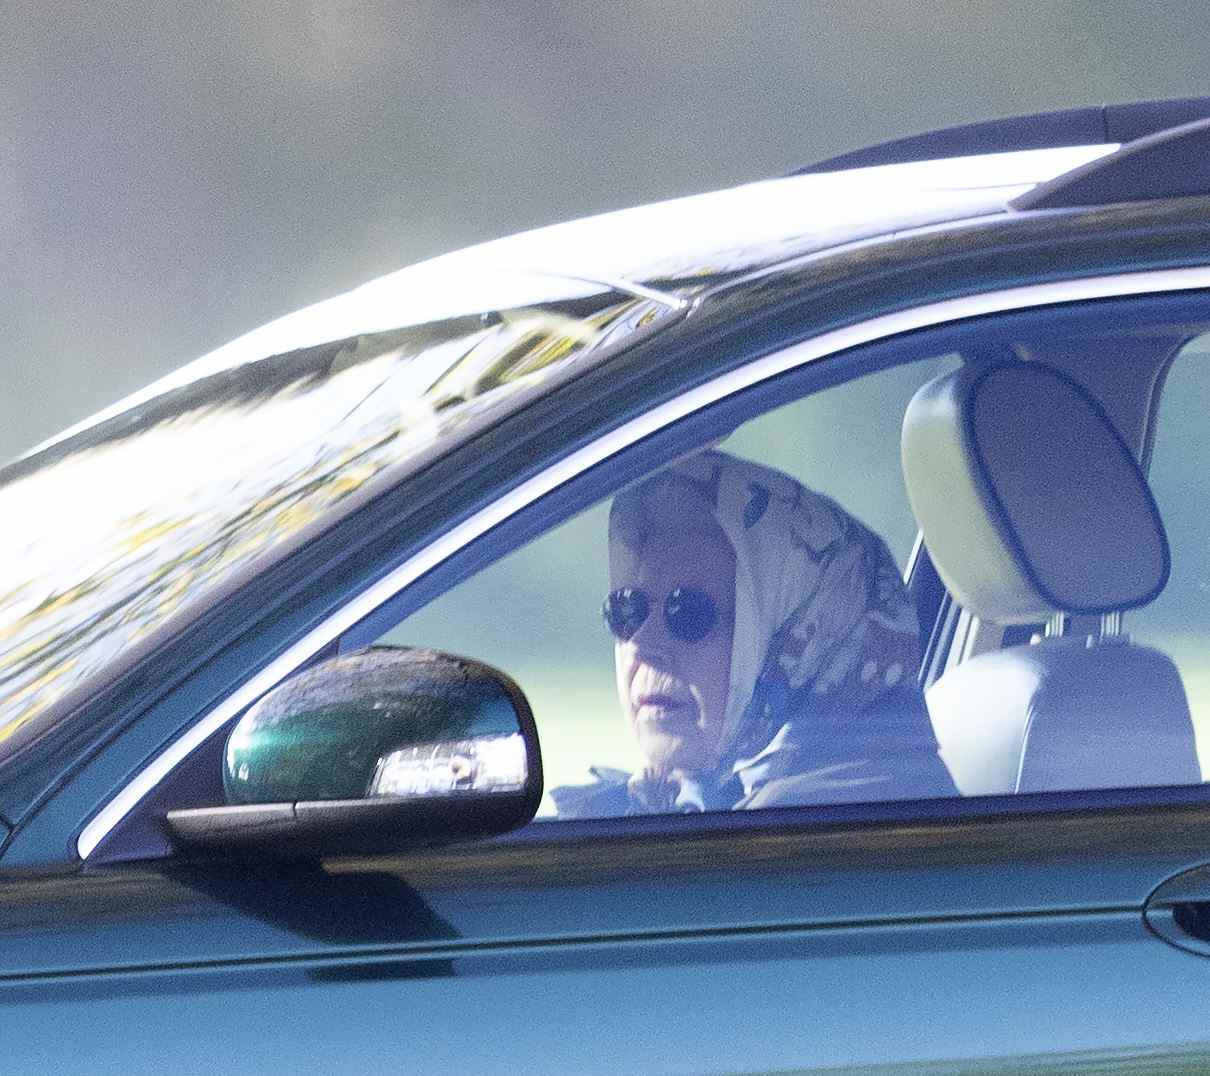 The Queen was spotted driving in Windsor today